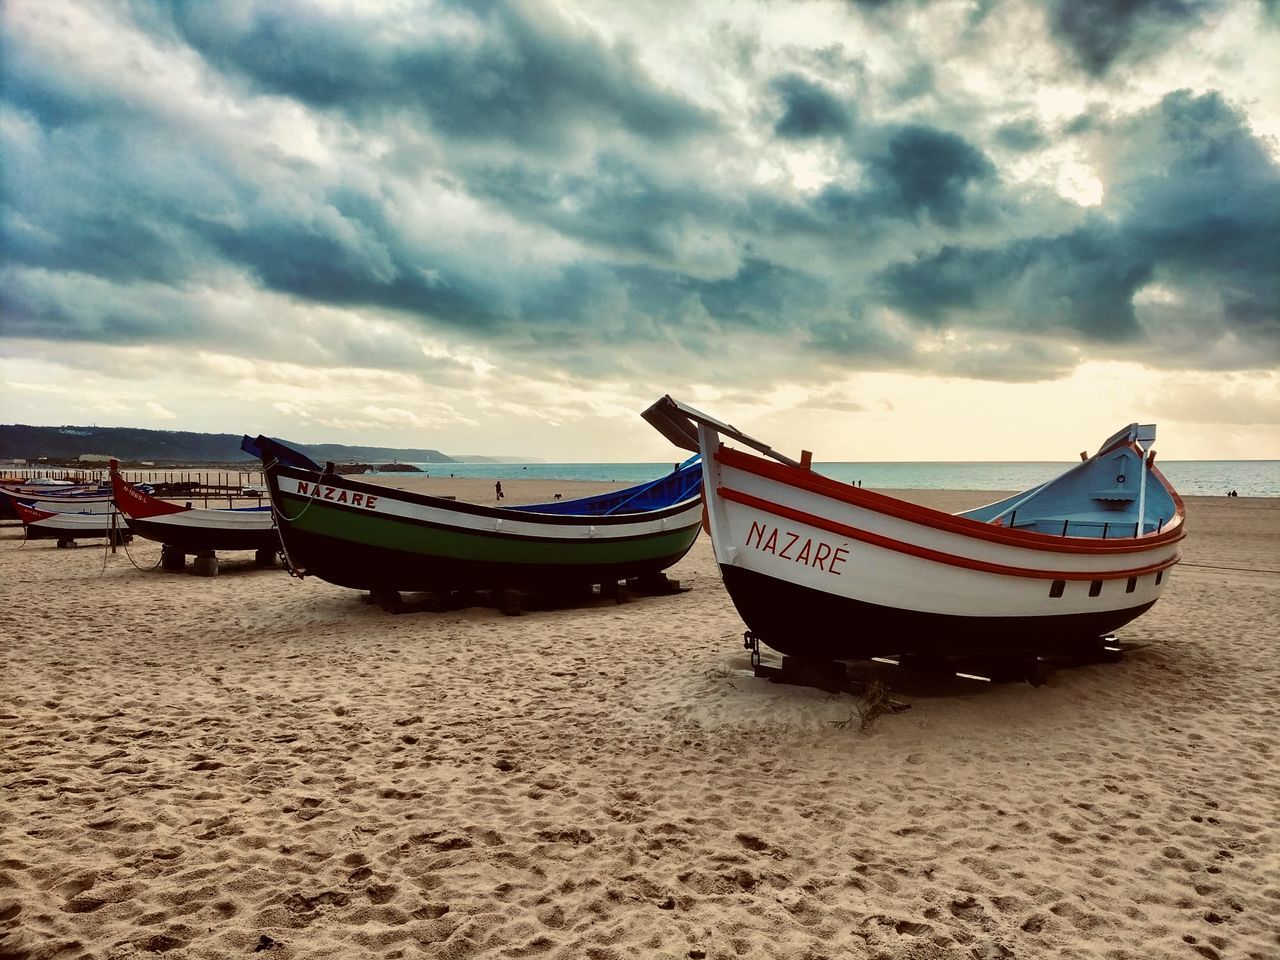 nautical vessel, beach, transportation, sky, water, mode of transportation, land, sand, cloud, sea, moored, boat, nature, long-tail boat, vehicle, shore, scenics - nature, tranquility, beauty in nature, no people, travel, tranquil scene, watercraft, outdoors, coast, travel destinations, rowboat, ocean, non-urban scene, sunset, wave, coastline, day, dramatic sky, landscape, holiday, boating, ship, absence